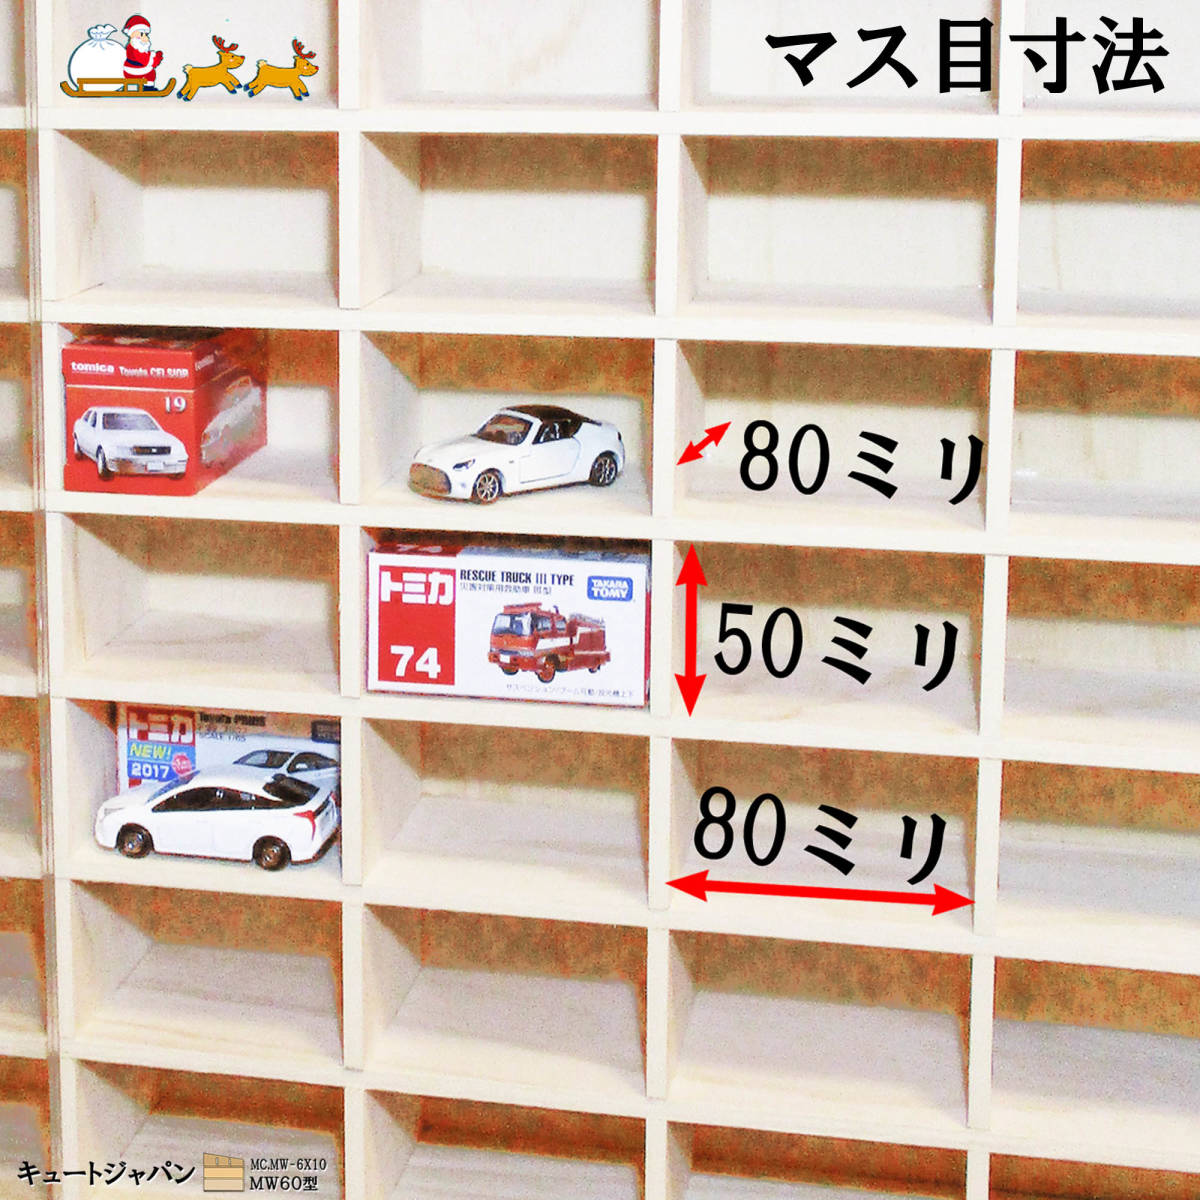 120 pcs minicar storage case acrylic fiber shoji attaching maple color painting made in Japan 60 trout collection display minicar case [ free shipping ]